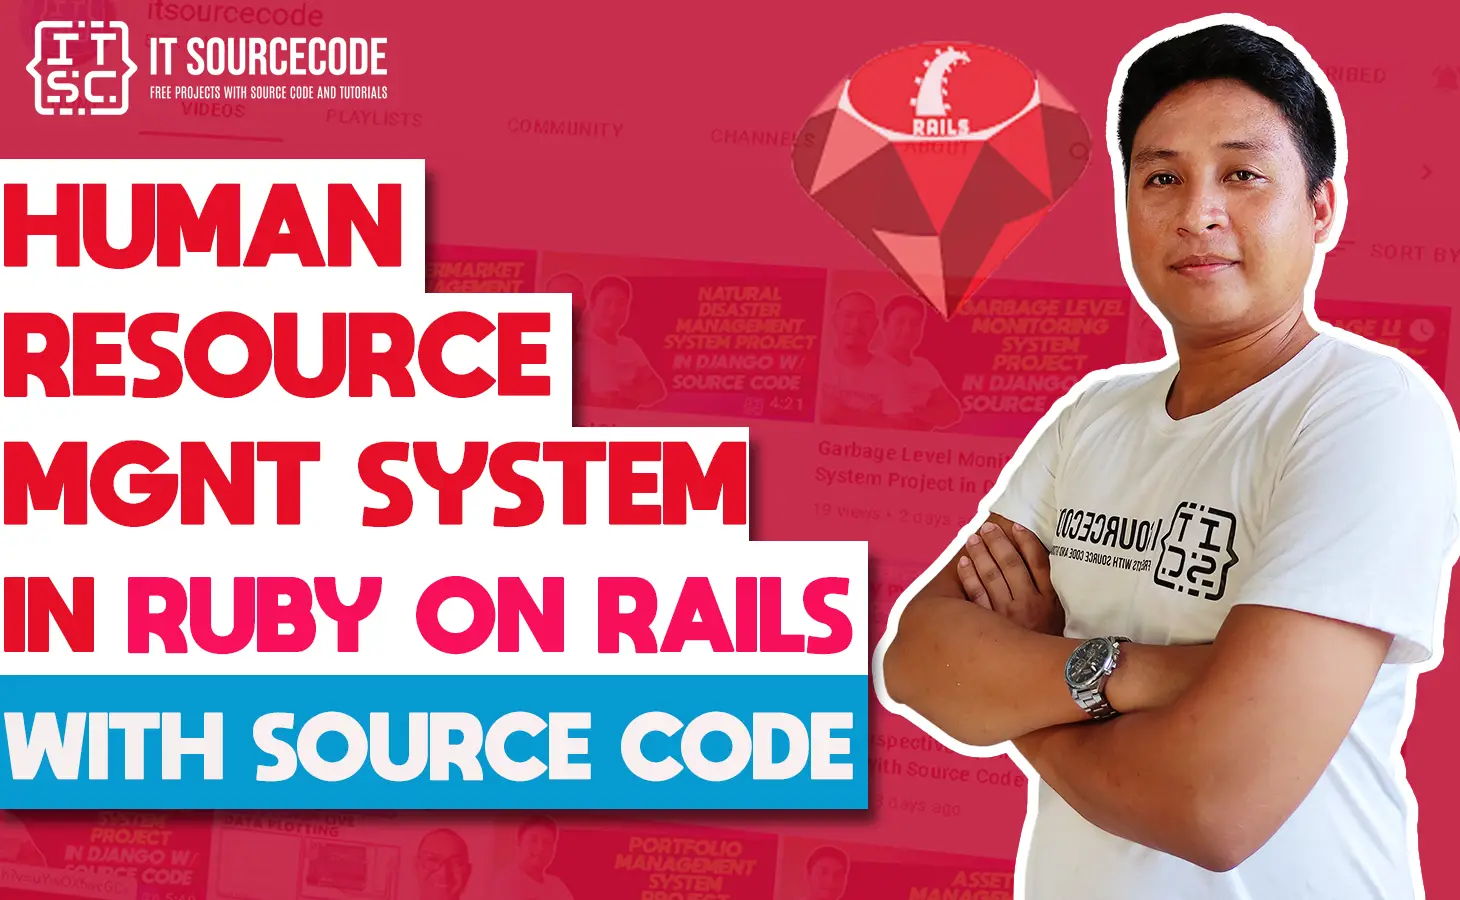 Human Resource Management System in Ruby on Rails with Source Code